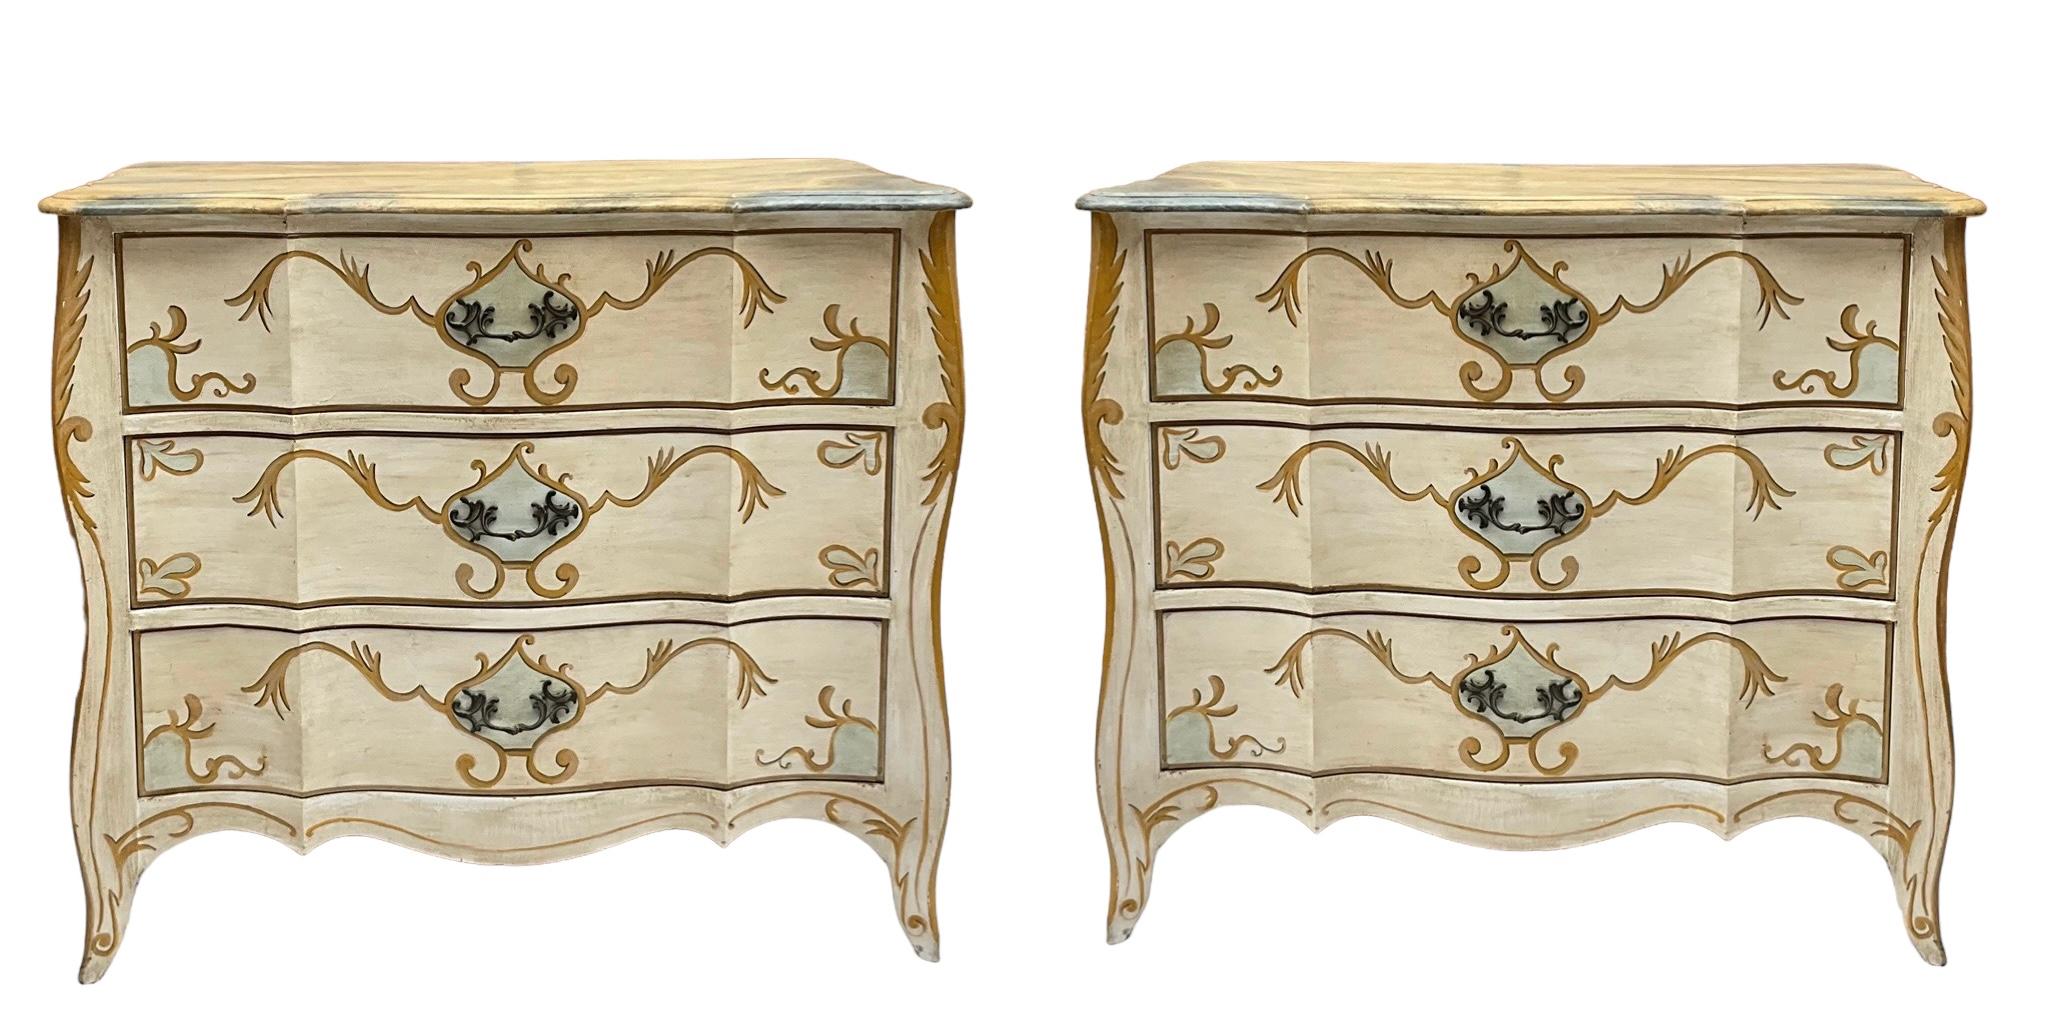 Brass Italian Chests / Commodes W/ French Styling & Faux Marble Painted Tops - Pair